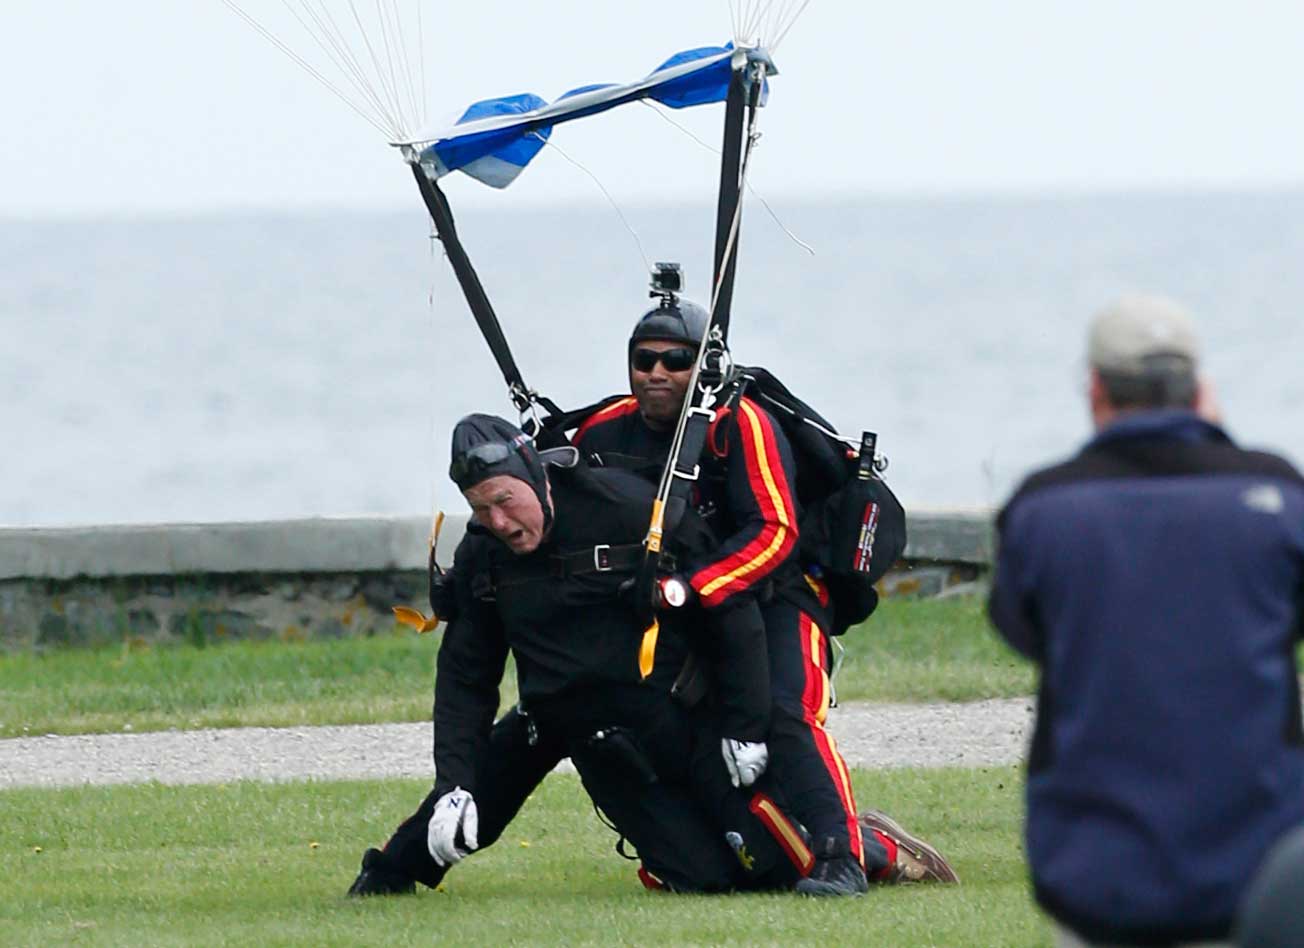 Former President George H.W. Bush, left, strapped to Sgt. 1st Class Mike Elliott, a retired member of the Army's Golden Knights parachute team, land on the lawn at St. Anne's Episcopal Church after making a tandem parachute jump near Bush's summer home in Kennebunkport, Maine, Thursday, June 12, 2014. (Robert F. Bukaty—;AP)